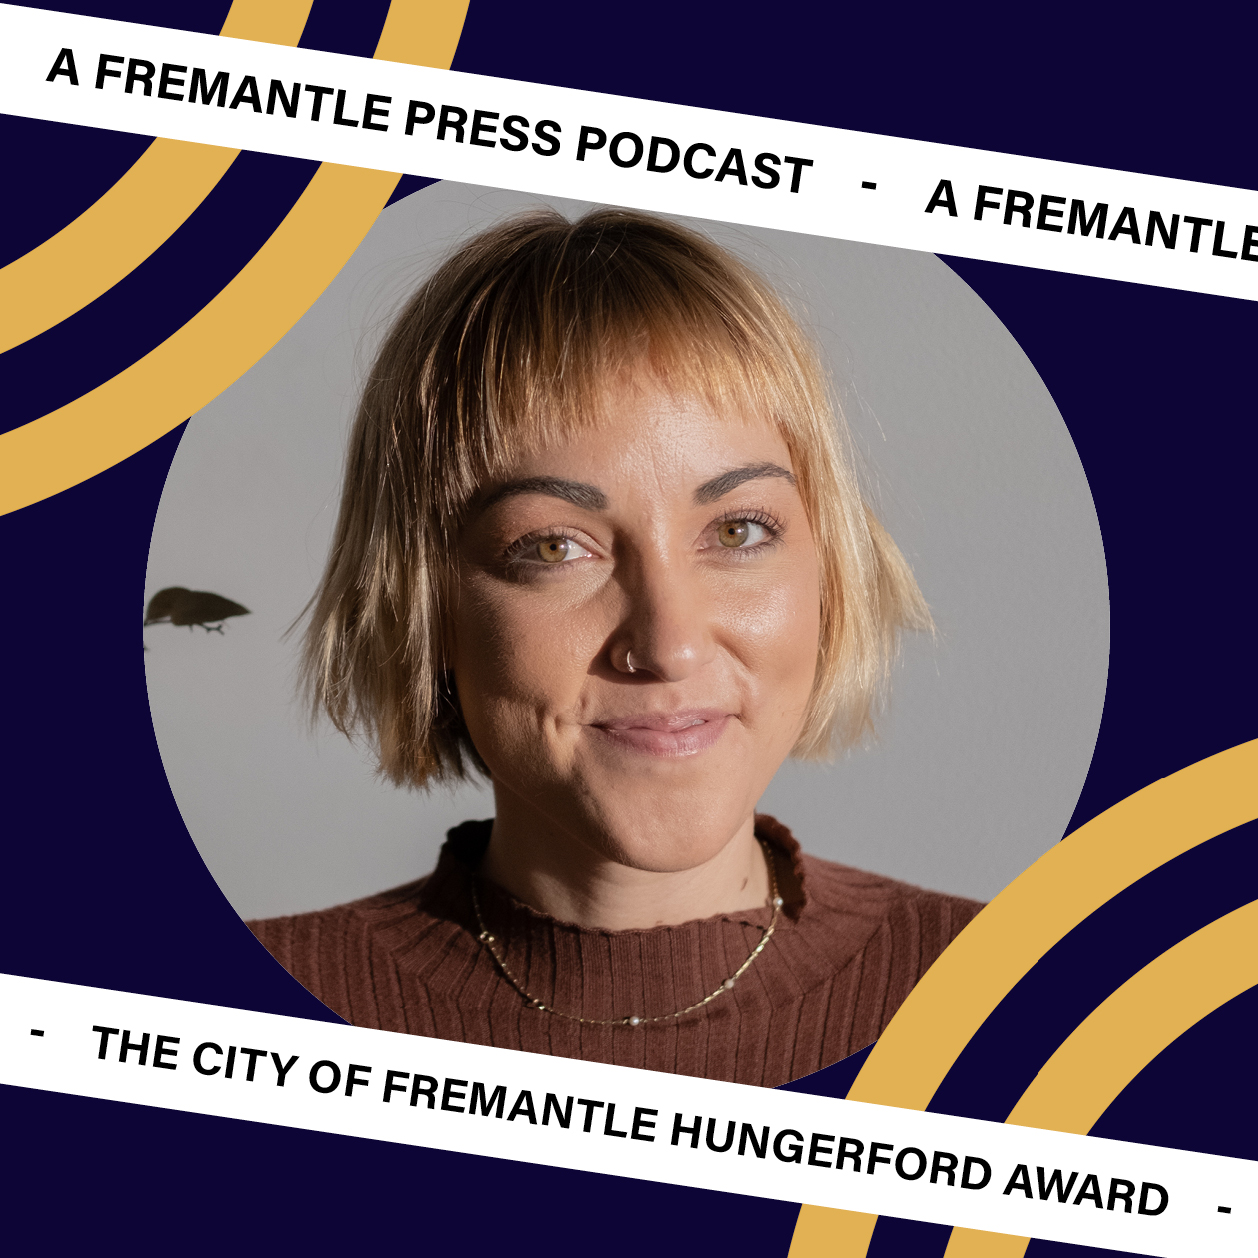 Maria Papas presents: Introducing shortlisted writer for the 2022 City of Fremantle Hungerford Award, Molly Schmidt.